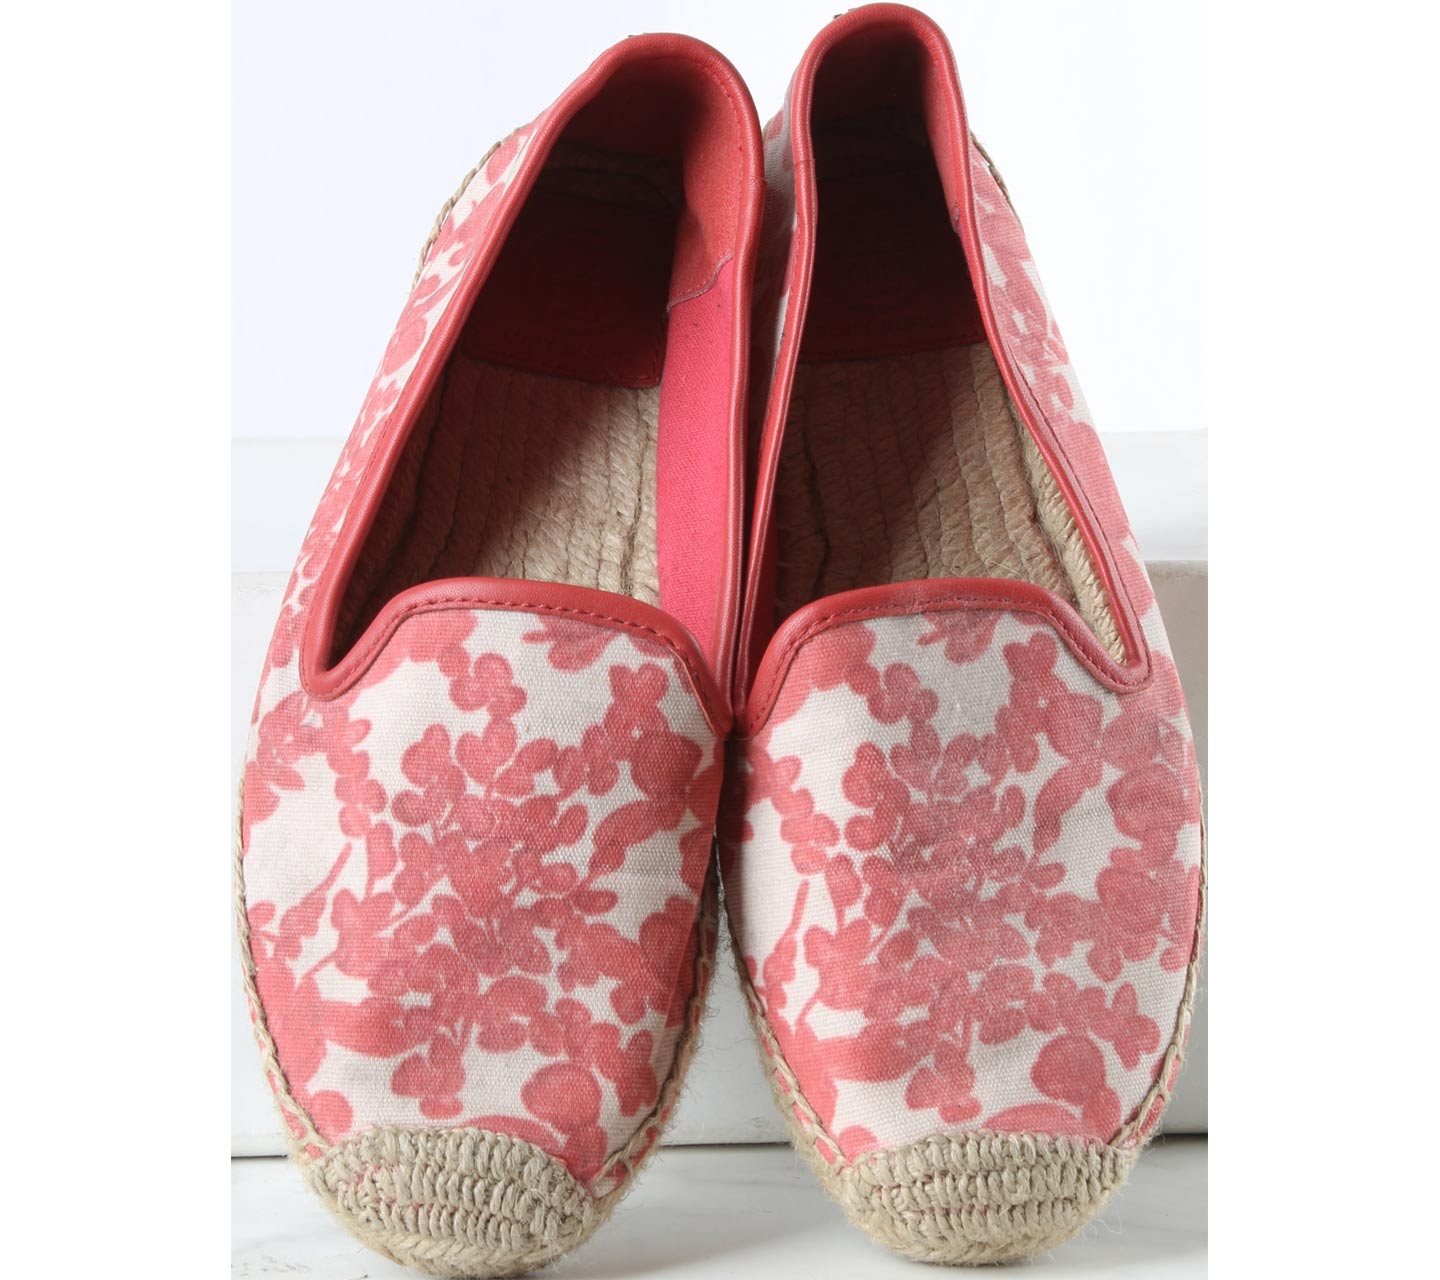 Tory Burch Red Floral Flats